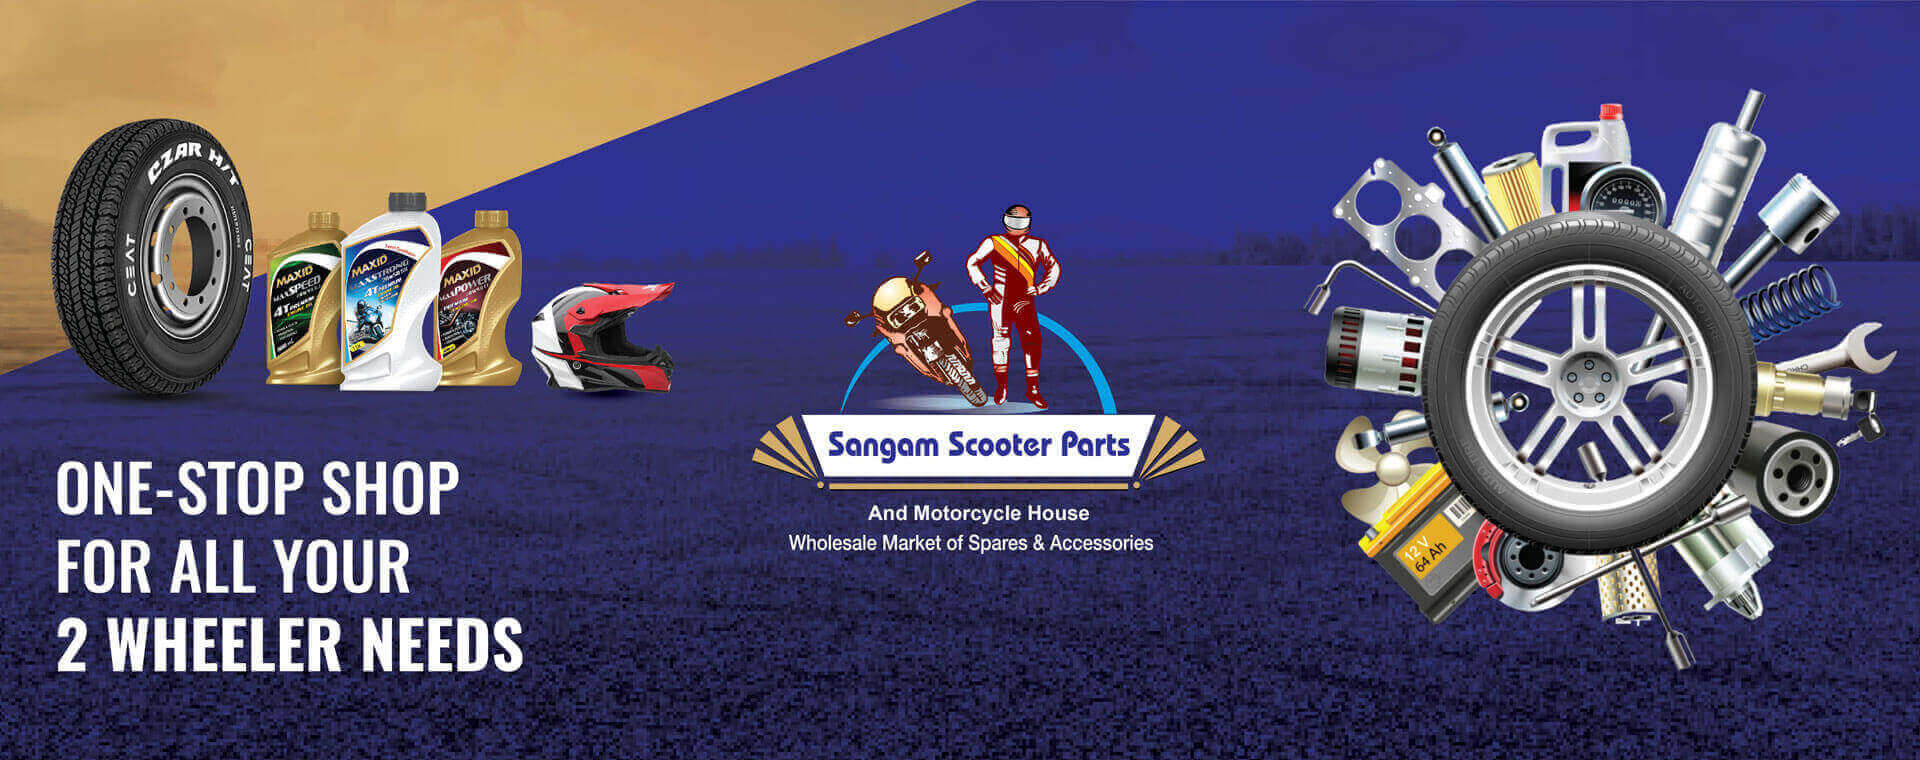 Shyam Scooter Banner